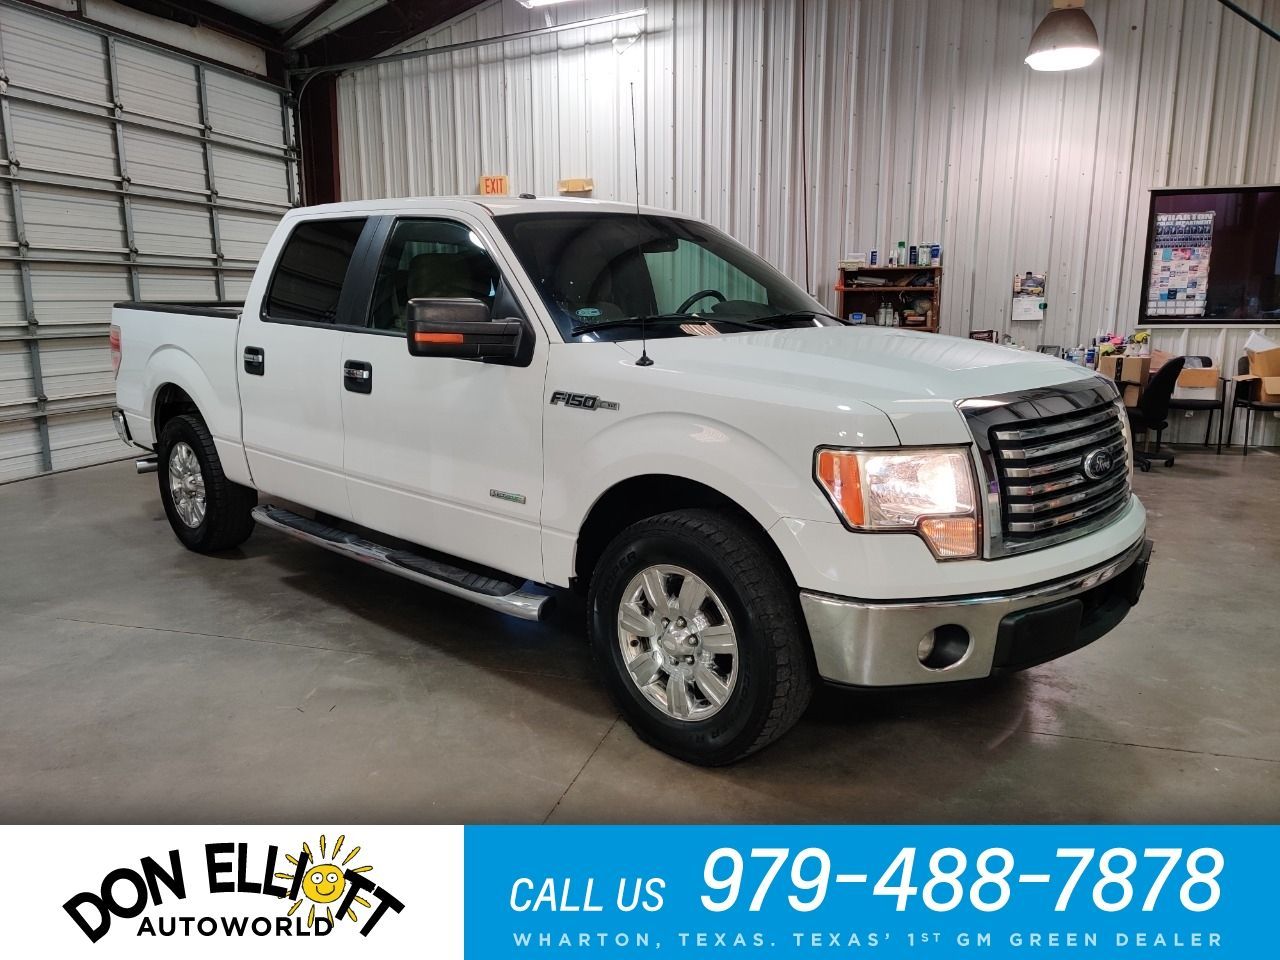 Used 2012 Ford F-150